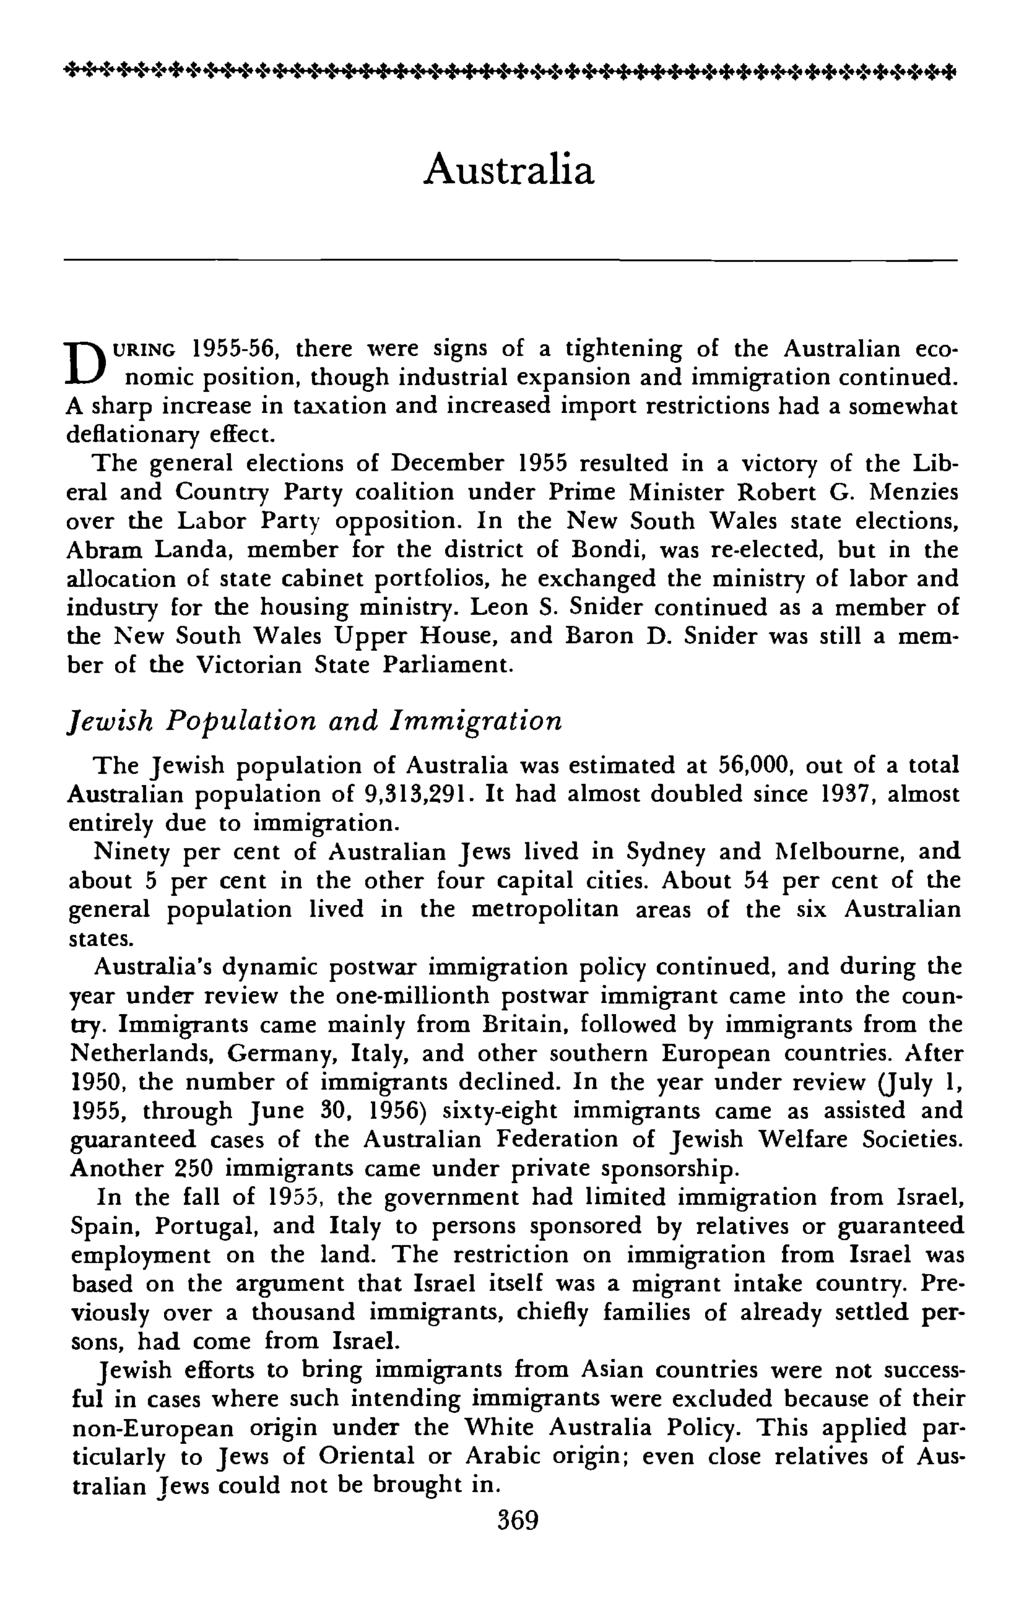 Australia DURING 1955-56, there were signs of a tightening of the Australian economic position, though industrial expansion and immigration continued.